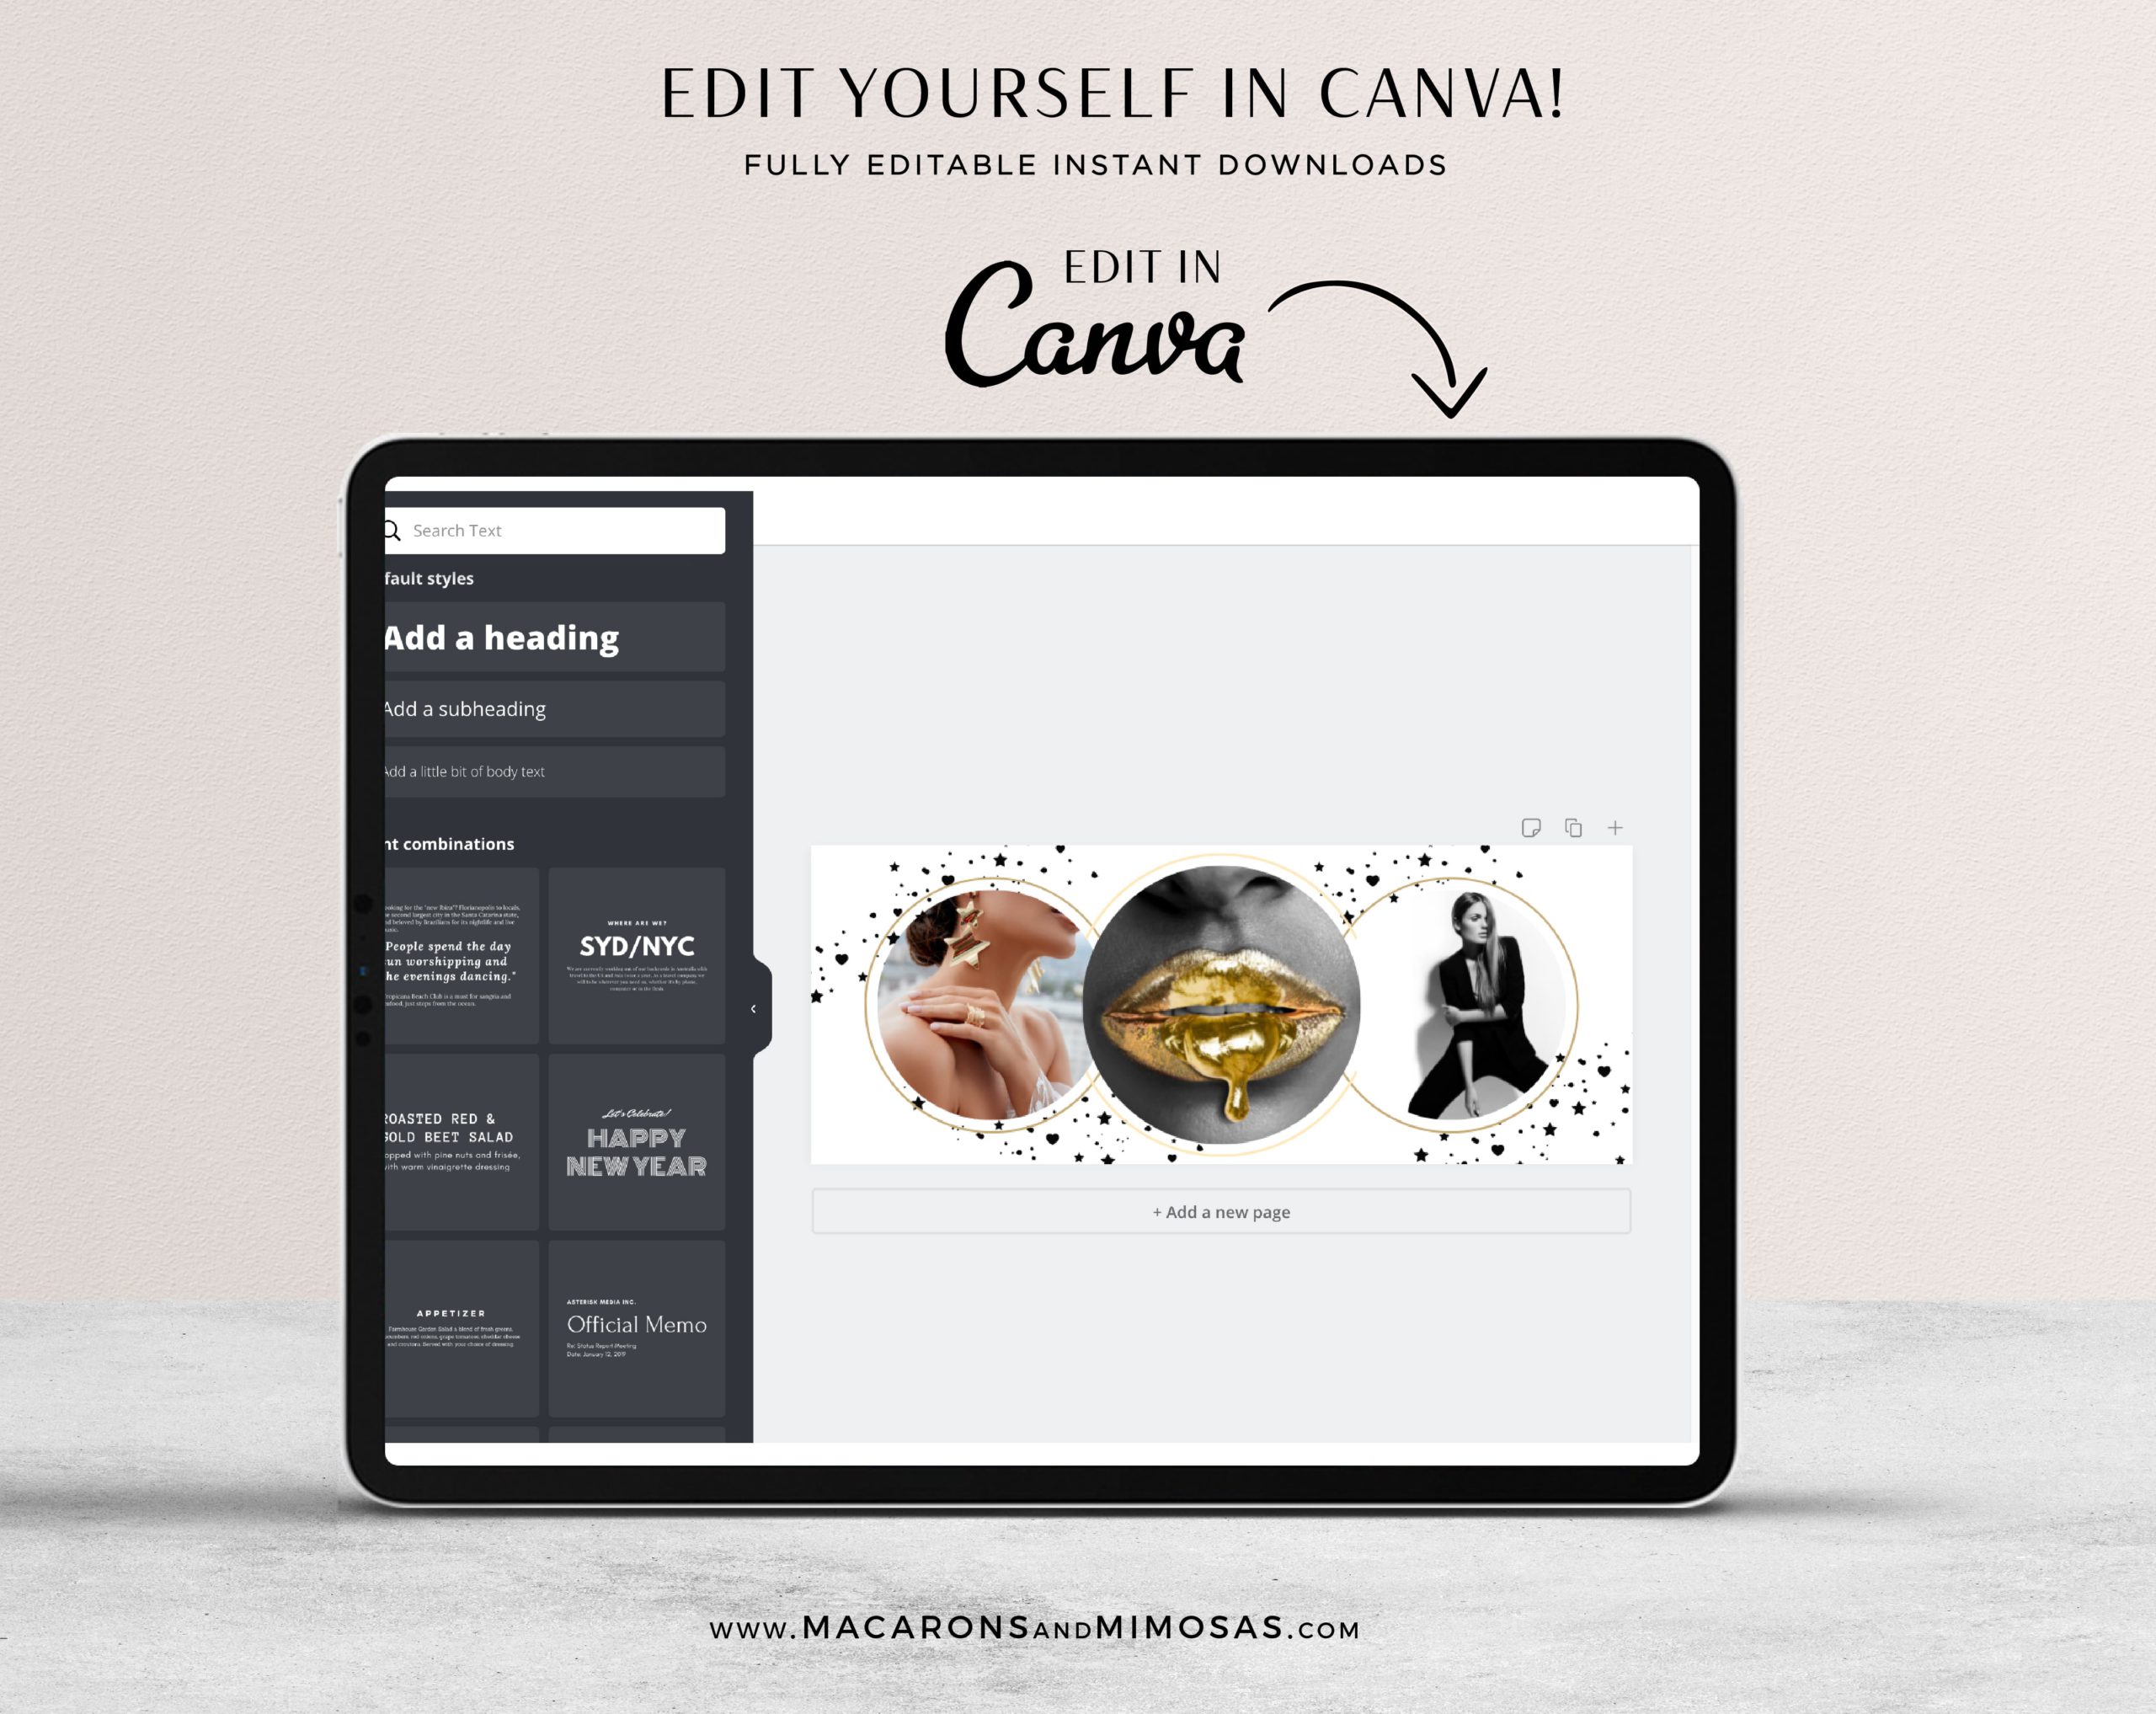 Metallic Gold Star Facebook Banner Template in chic feminine black and metallic gold. Editable in Canva, DIY Facebook Templates for Canva edit to fit your brand!